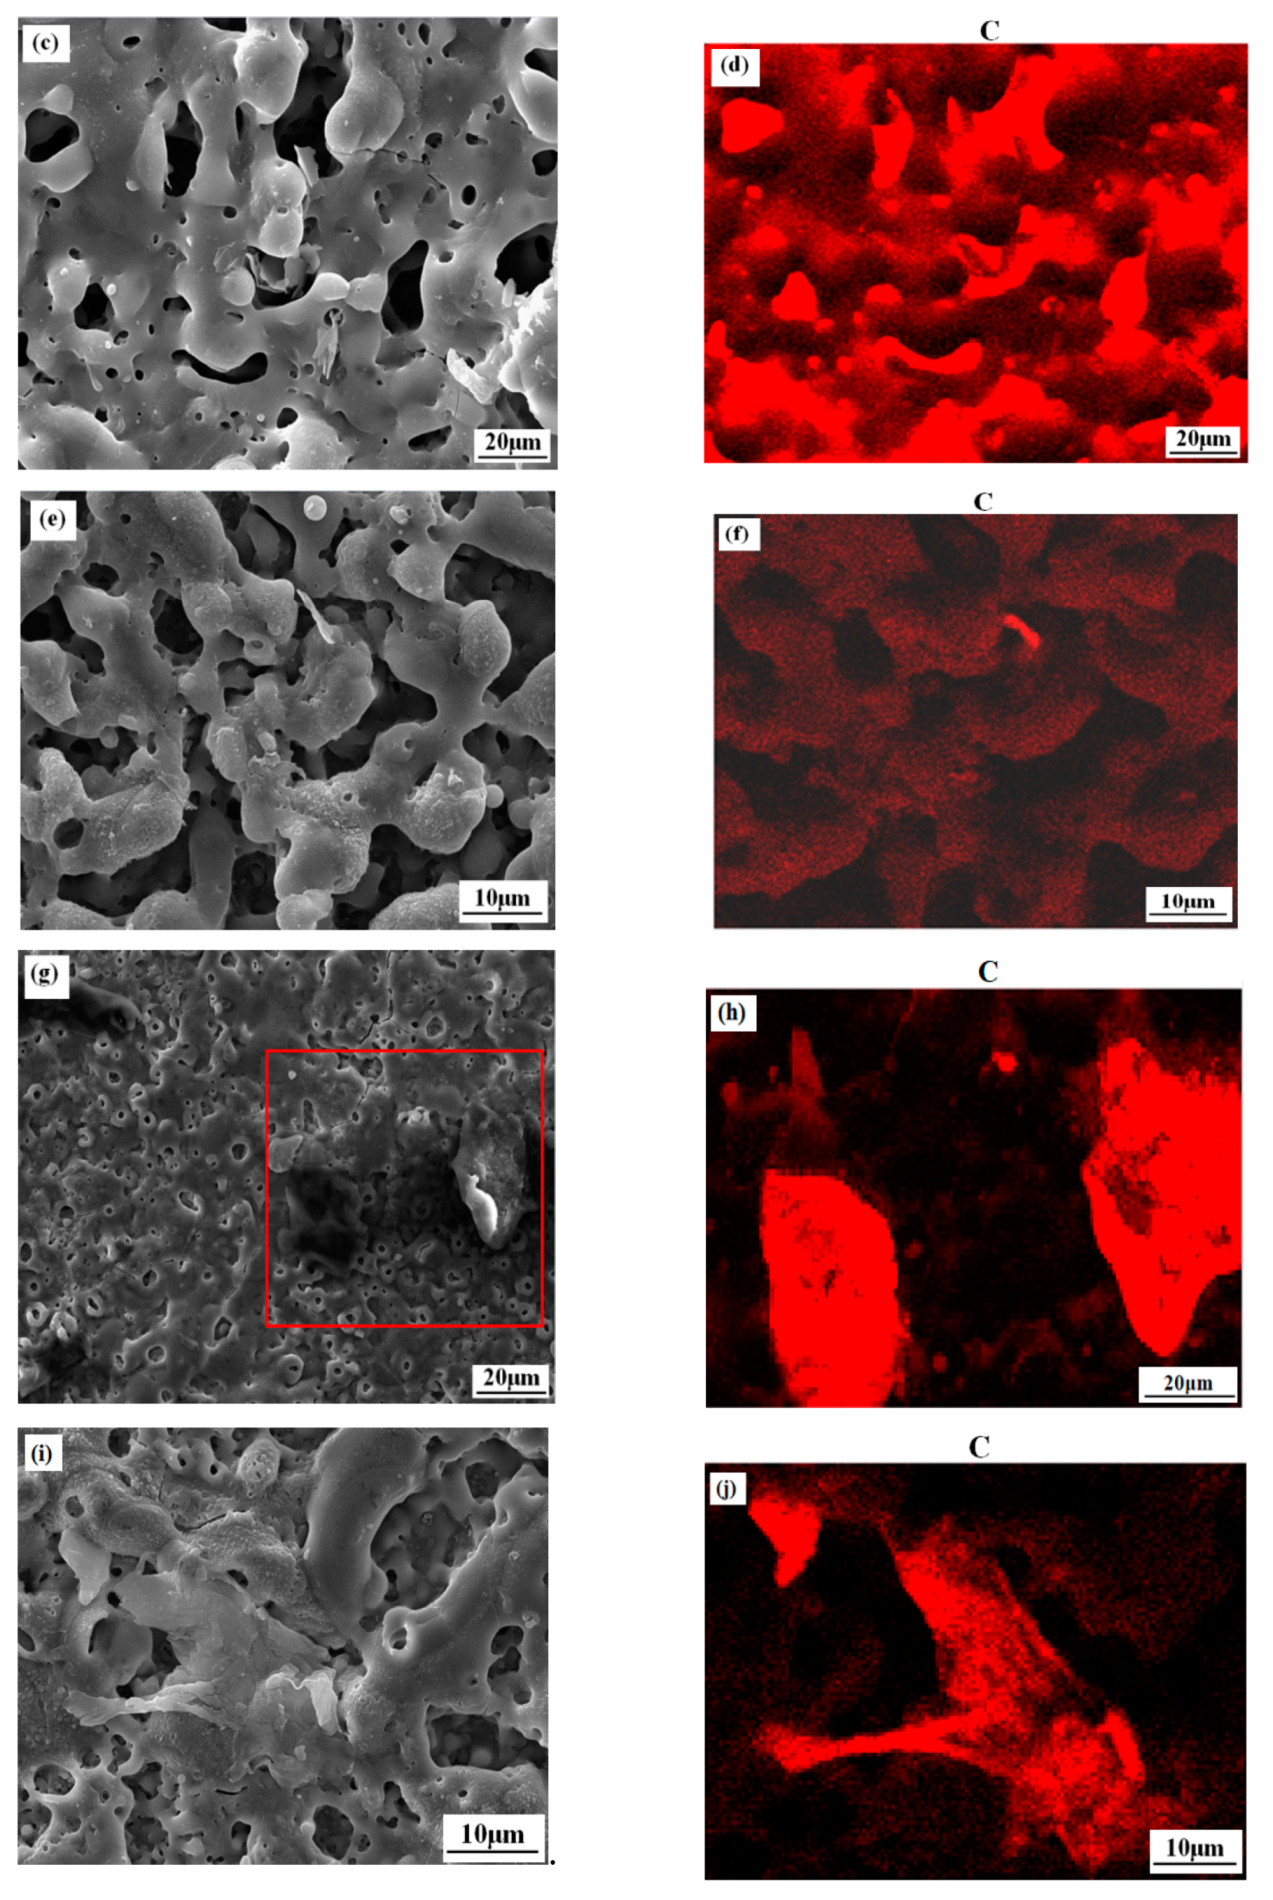 Coatings Free Full Text Corrosion And Wear Behavior Of Peo Coatings On D16t Aluminum Alloy With Different Concentrations Of Graphene Html